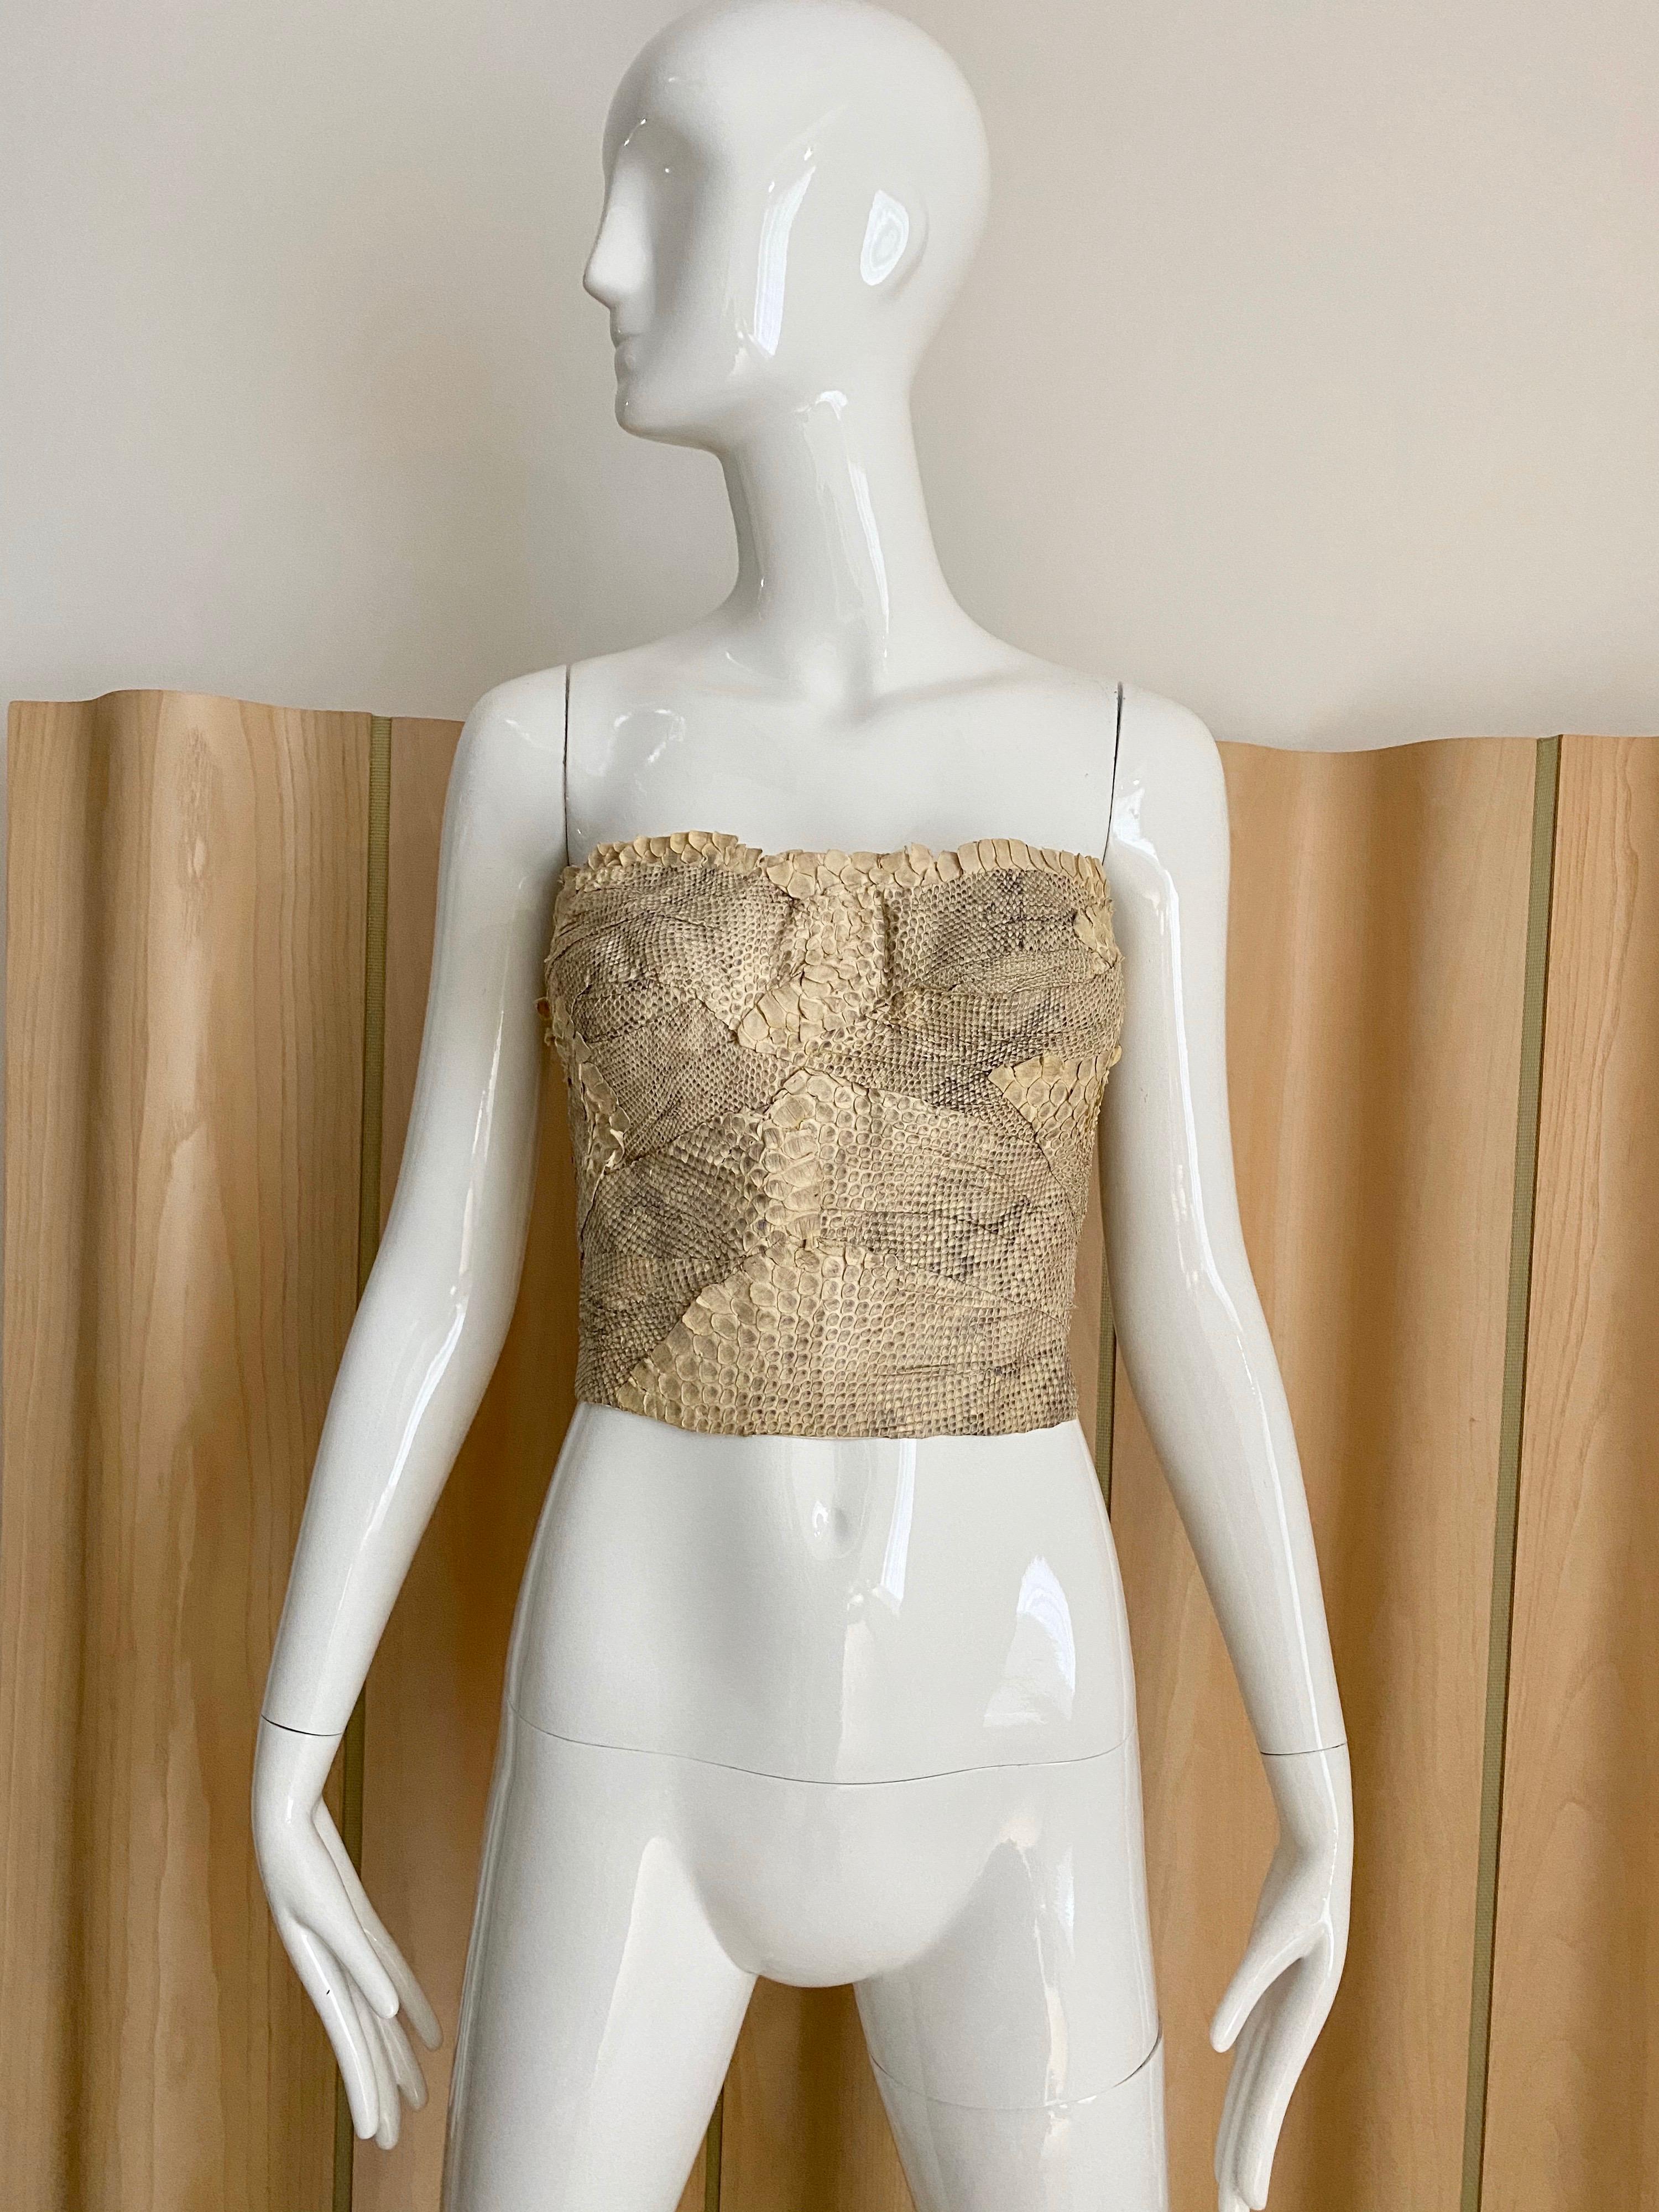 Incredible sexy John Galliano snake skin bustier. Best fir size 4 Us 
Bust measurement :34”  /Smaller part of torso : 18” / Bustier length : 10”
**if you want speedy delivery, please choose fedex express.
